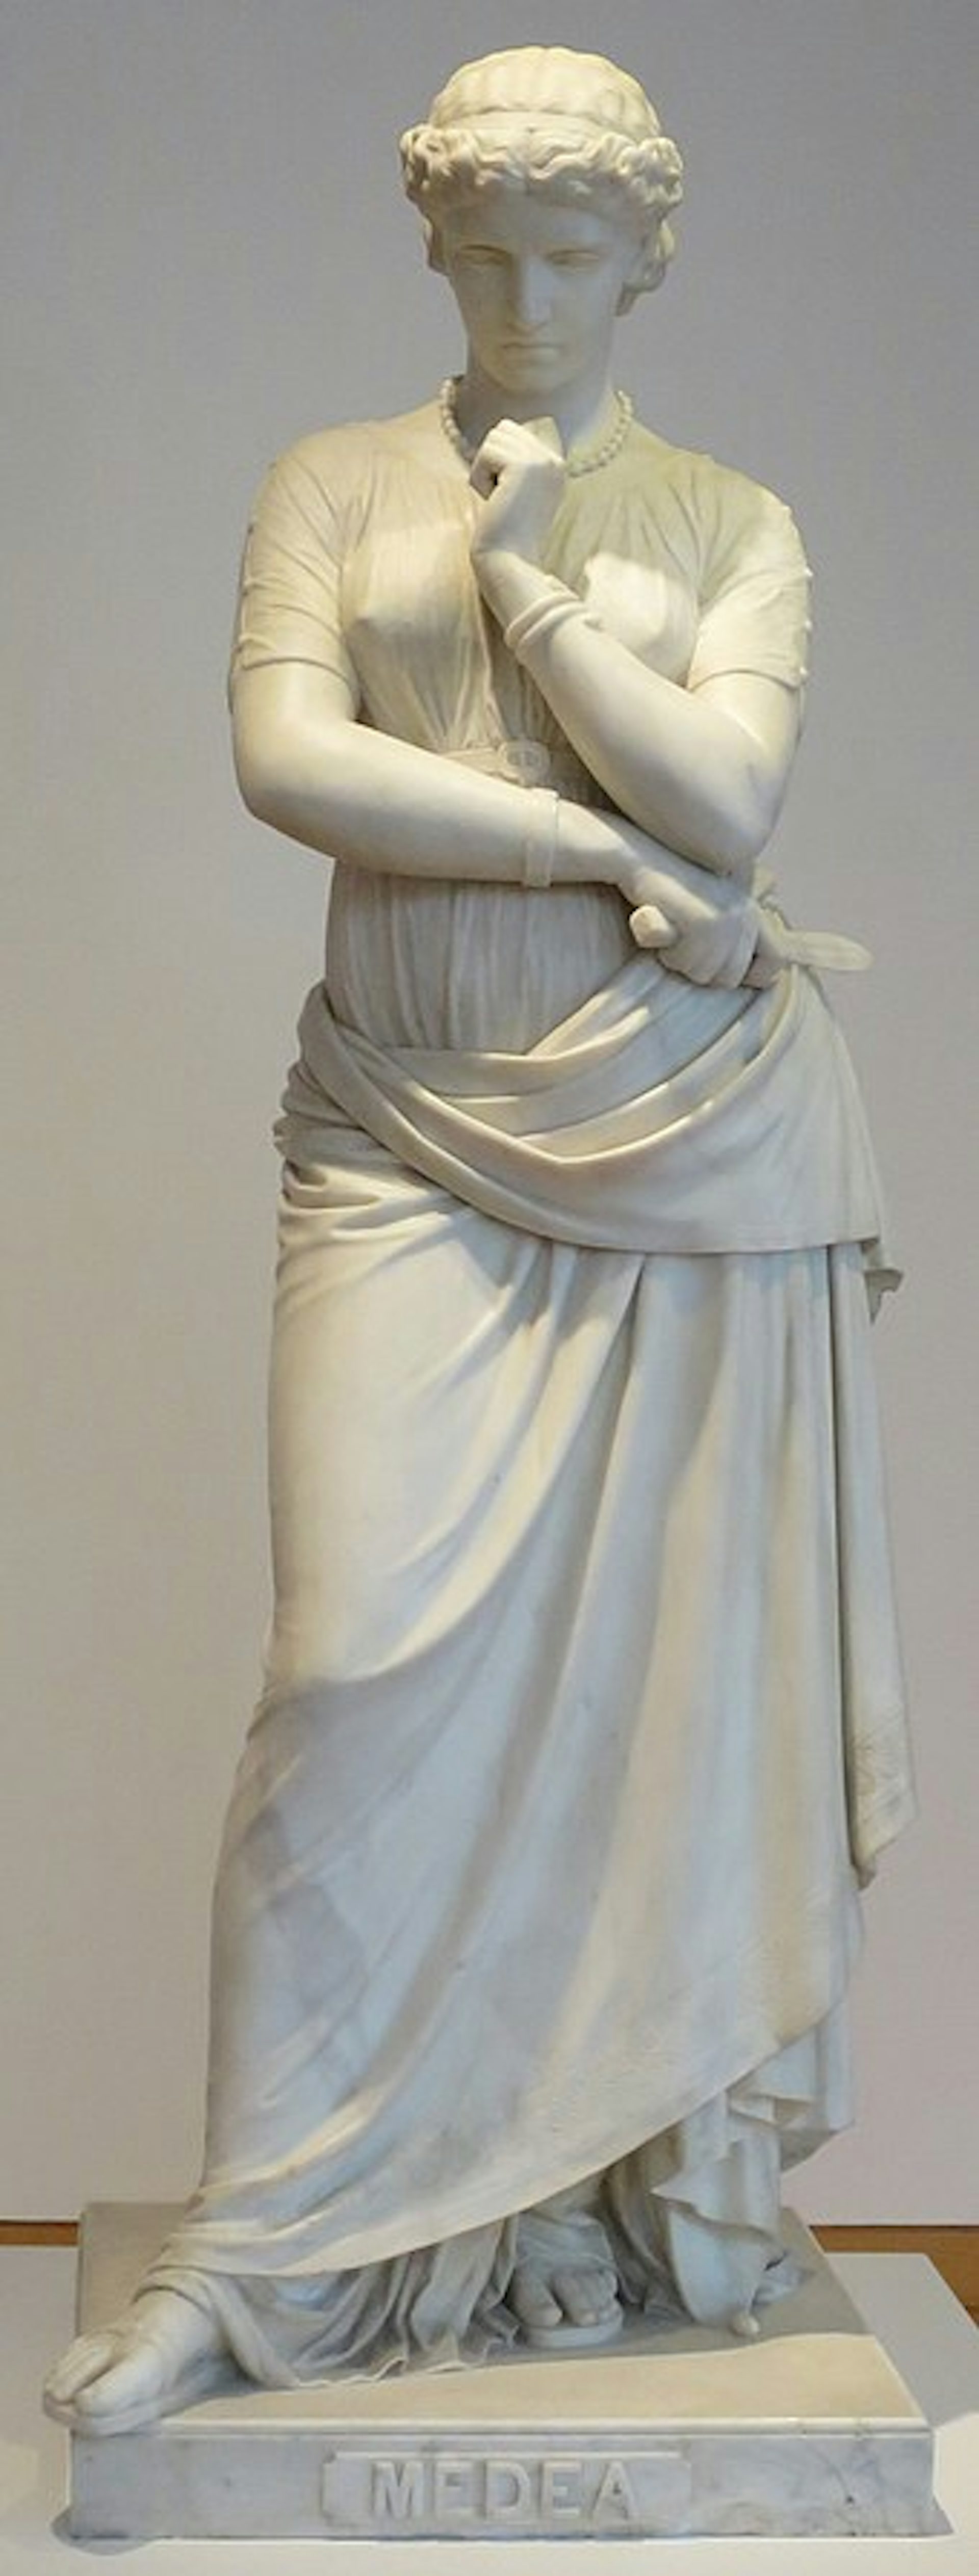 Medea by William Wetmore Story